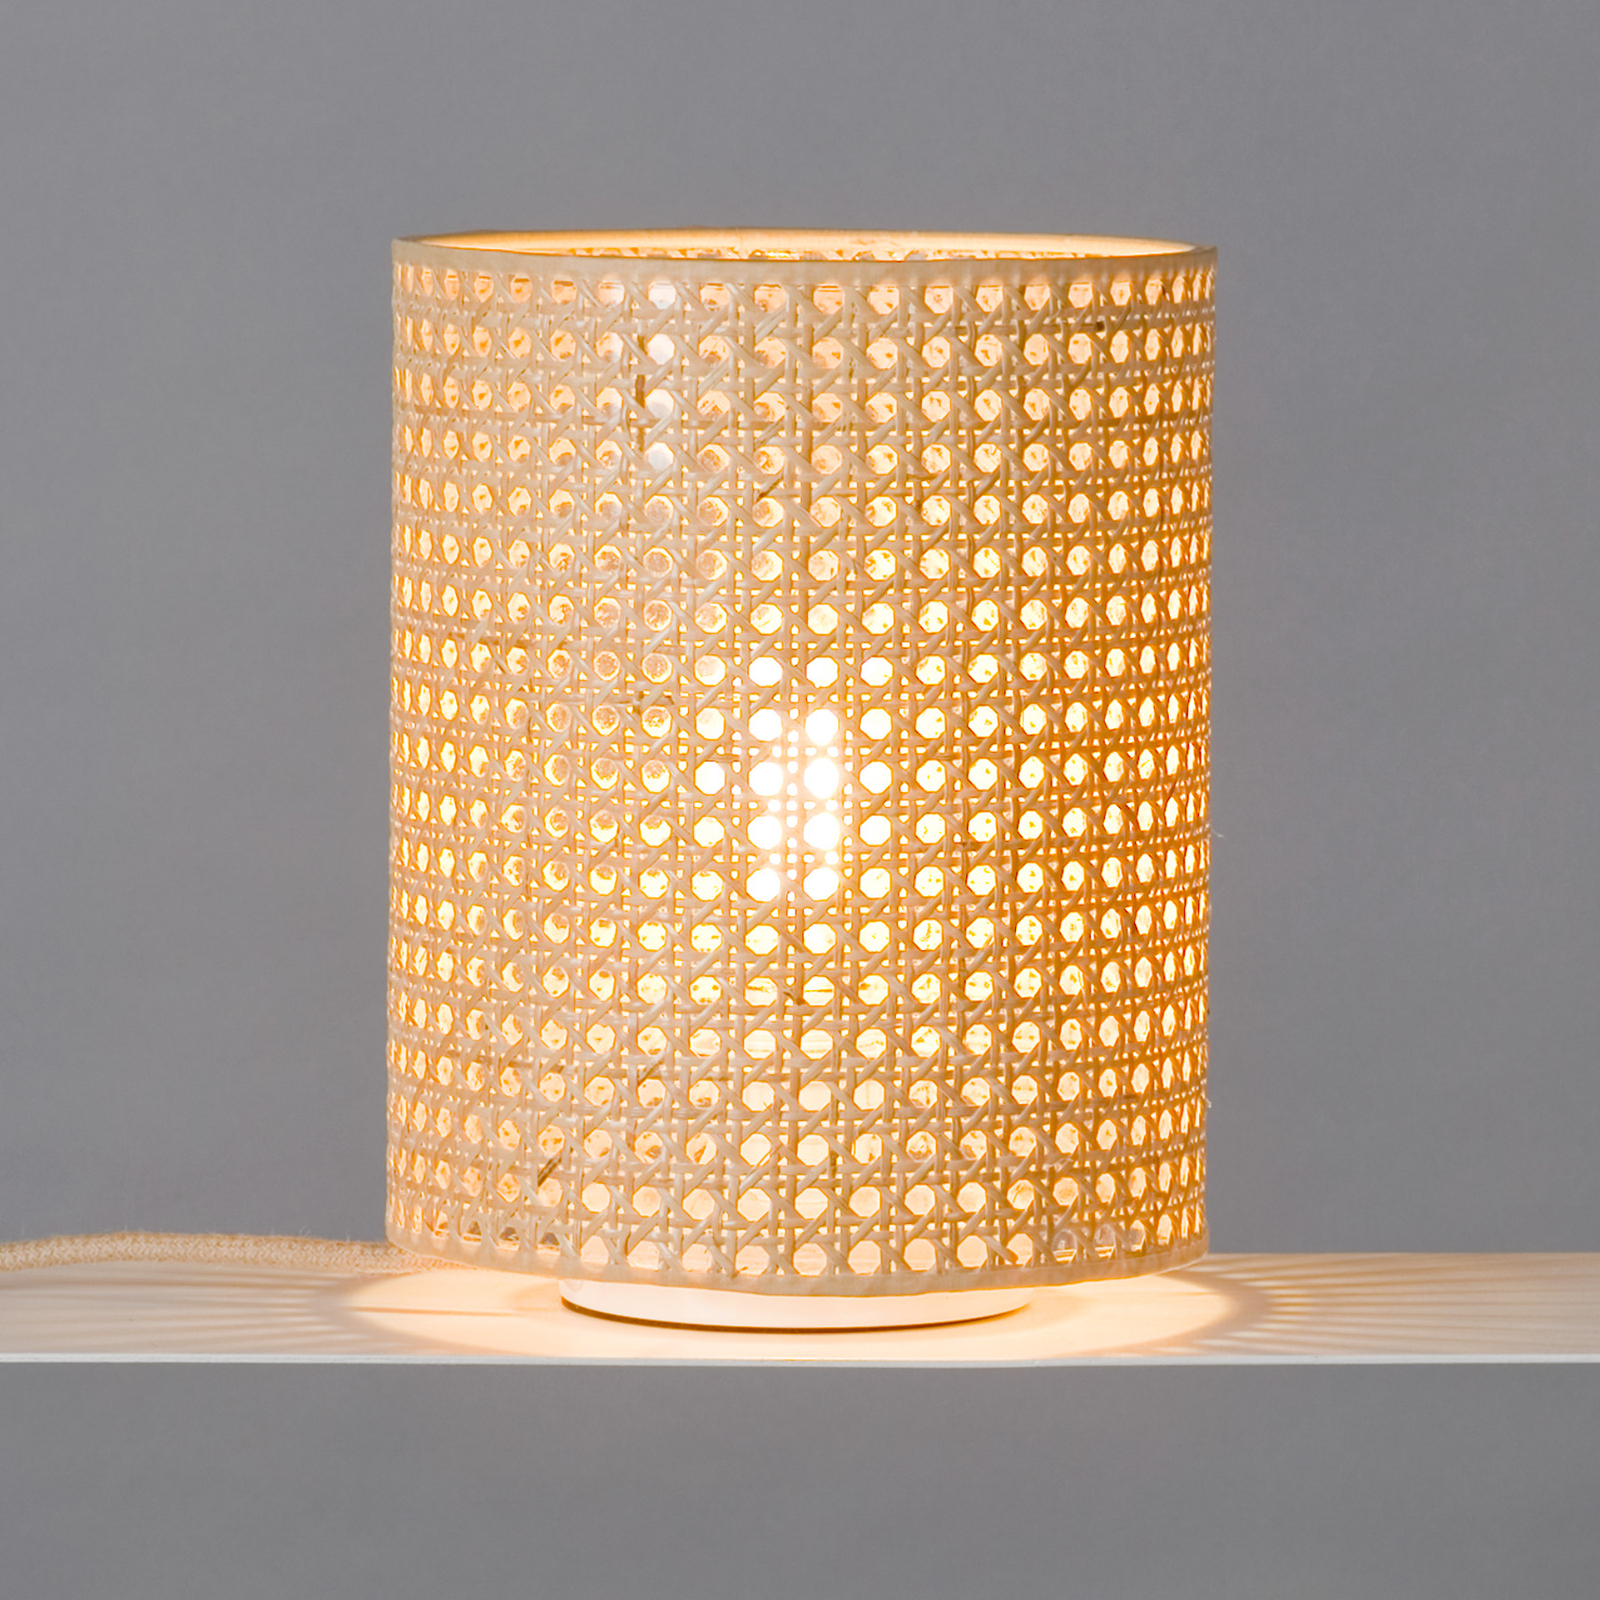 Wiener table lamp with a woven rattan shade